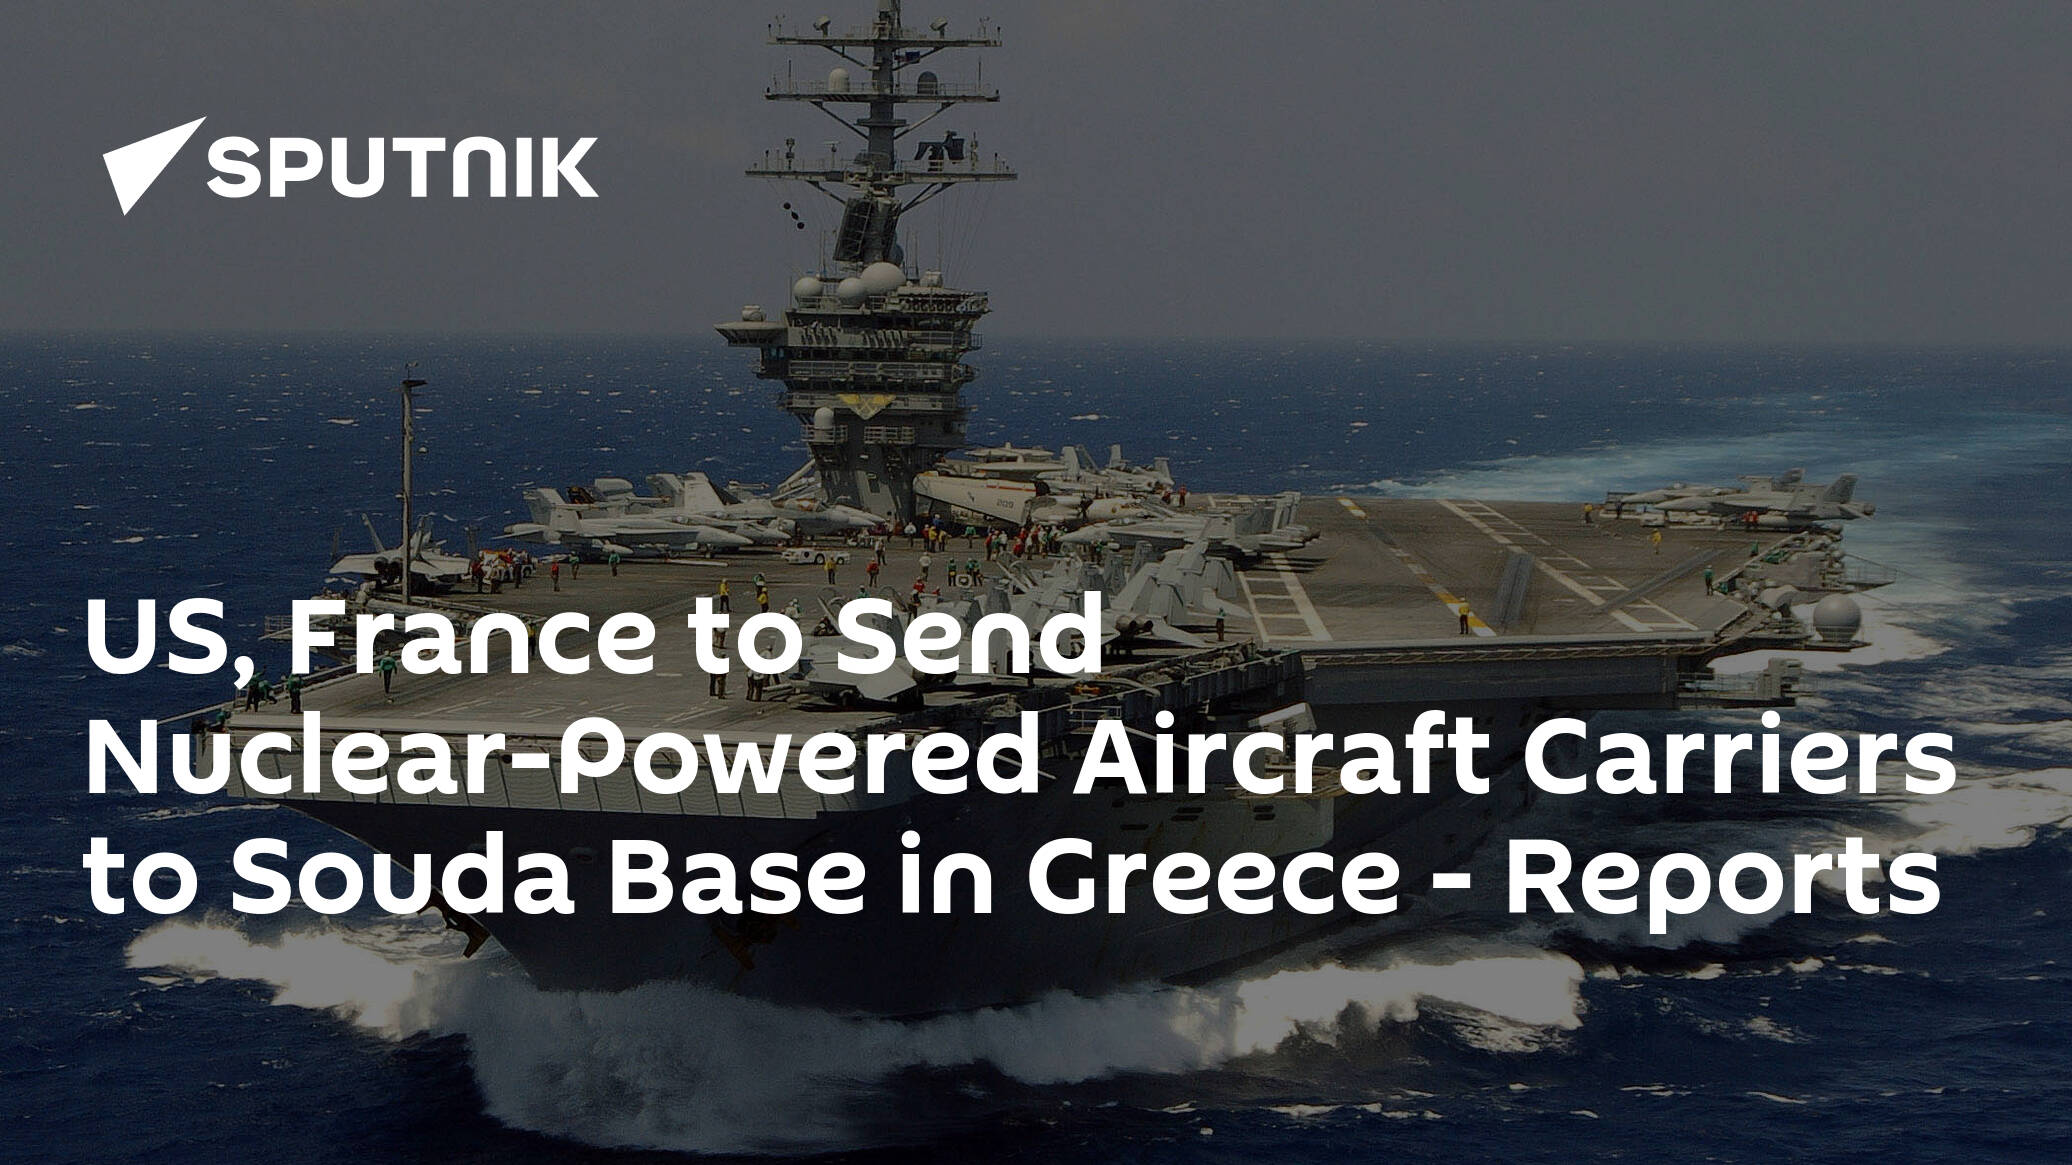 US, France to Send Nuclear-Powered Aircraft Carriers to Souda Base in Greece - Reports